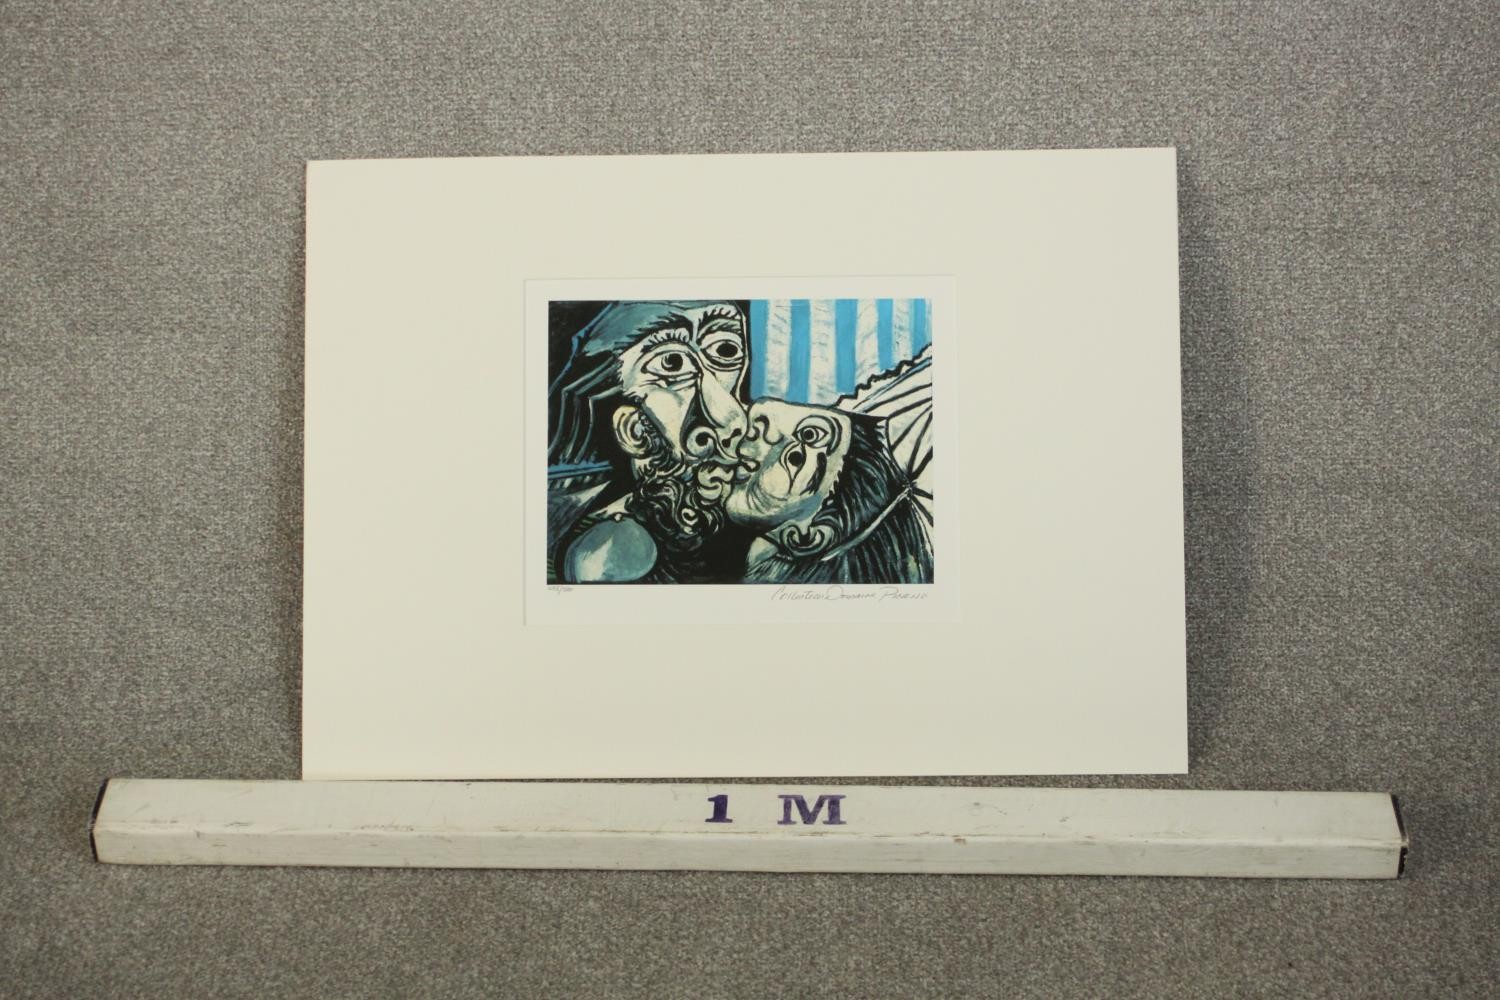 After Pablo Picasso, Le Baiser (The Kiss), (1969), giclée print on archival paper, edition 298/ - Image 3 of 6